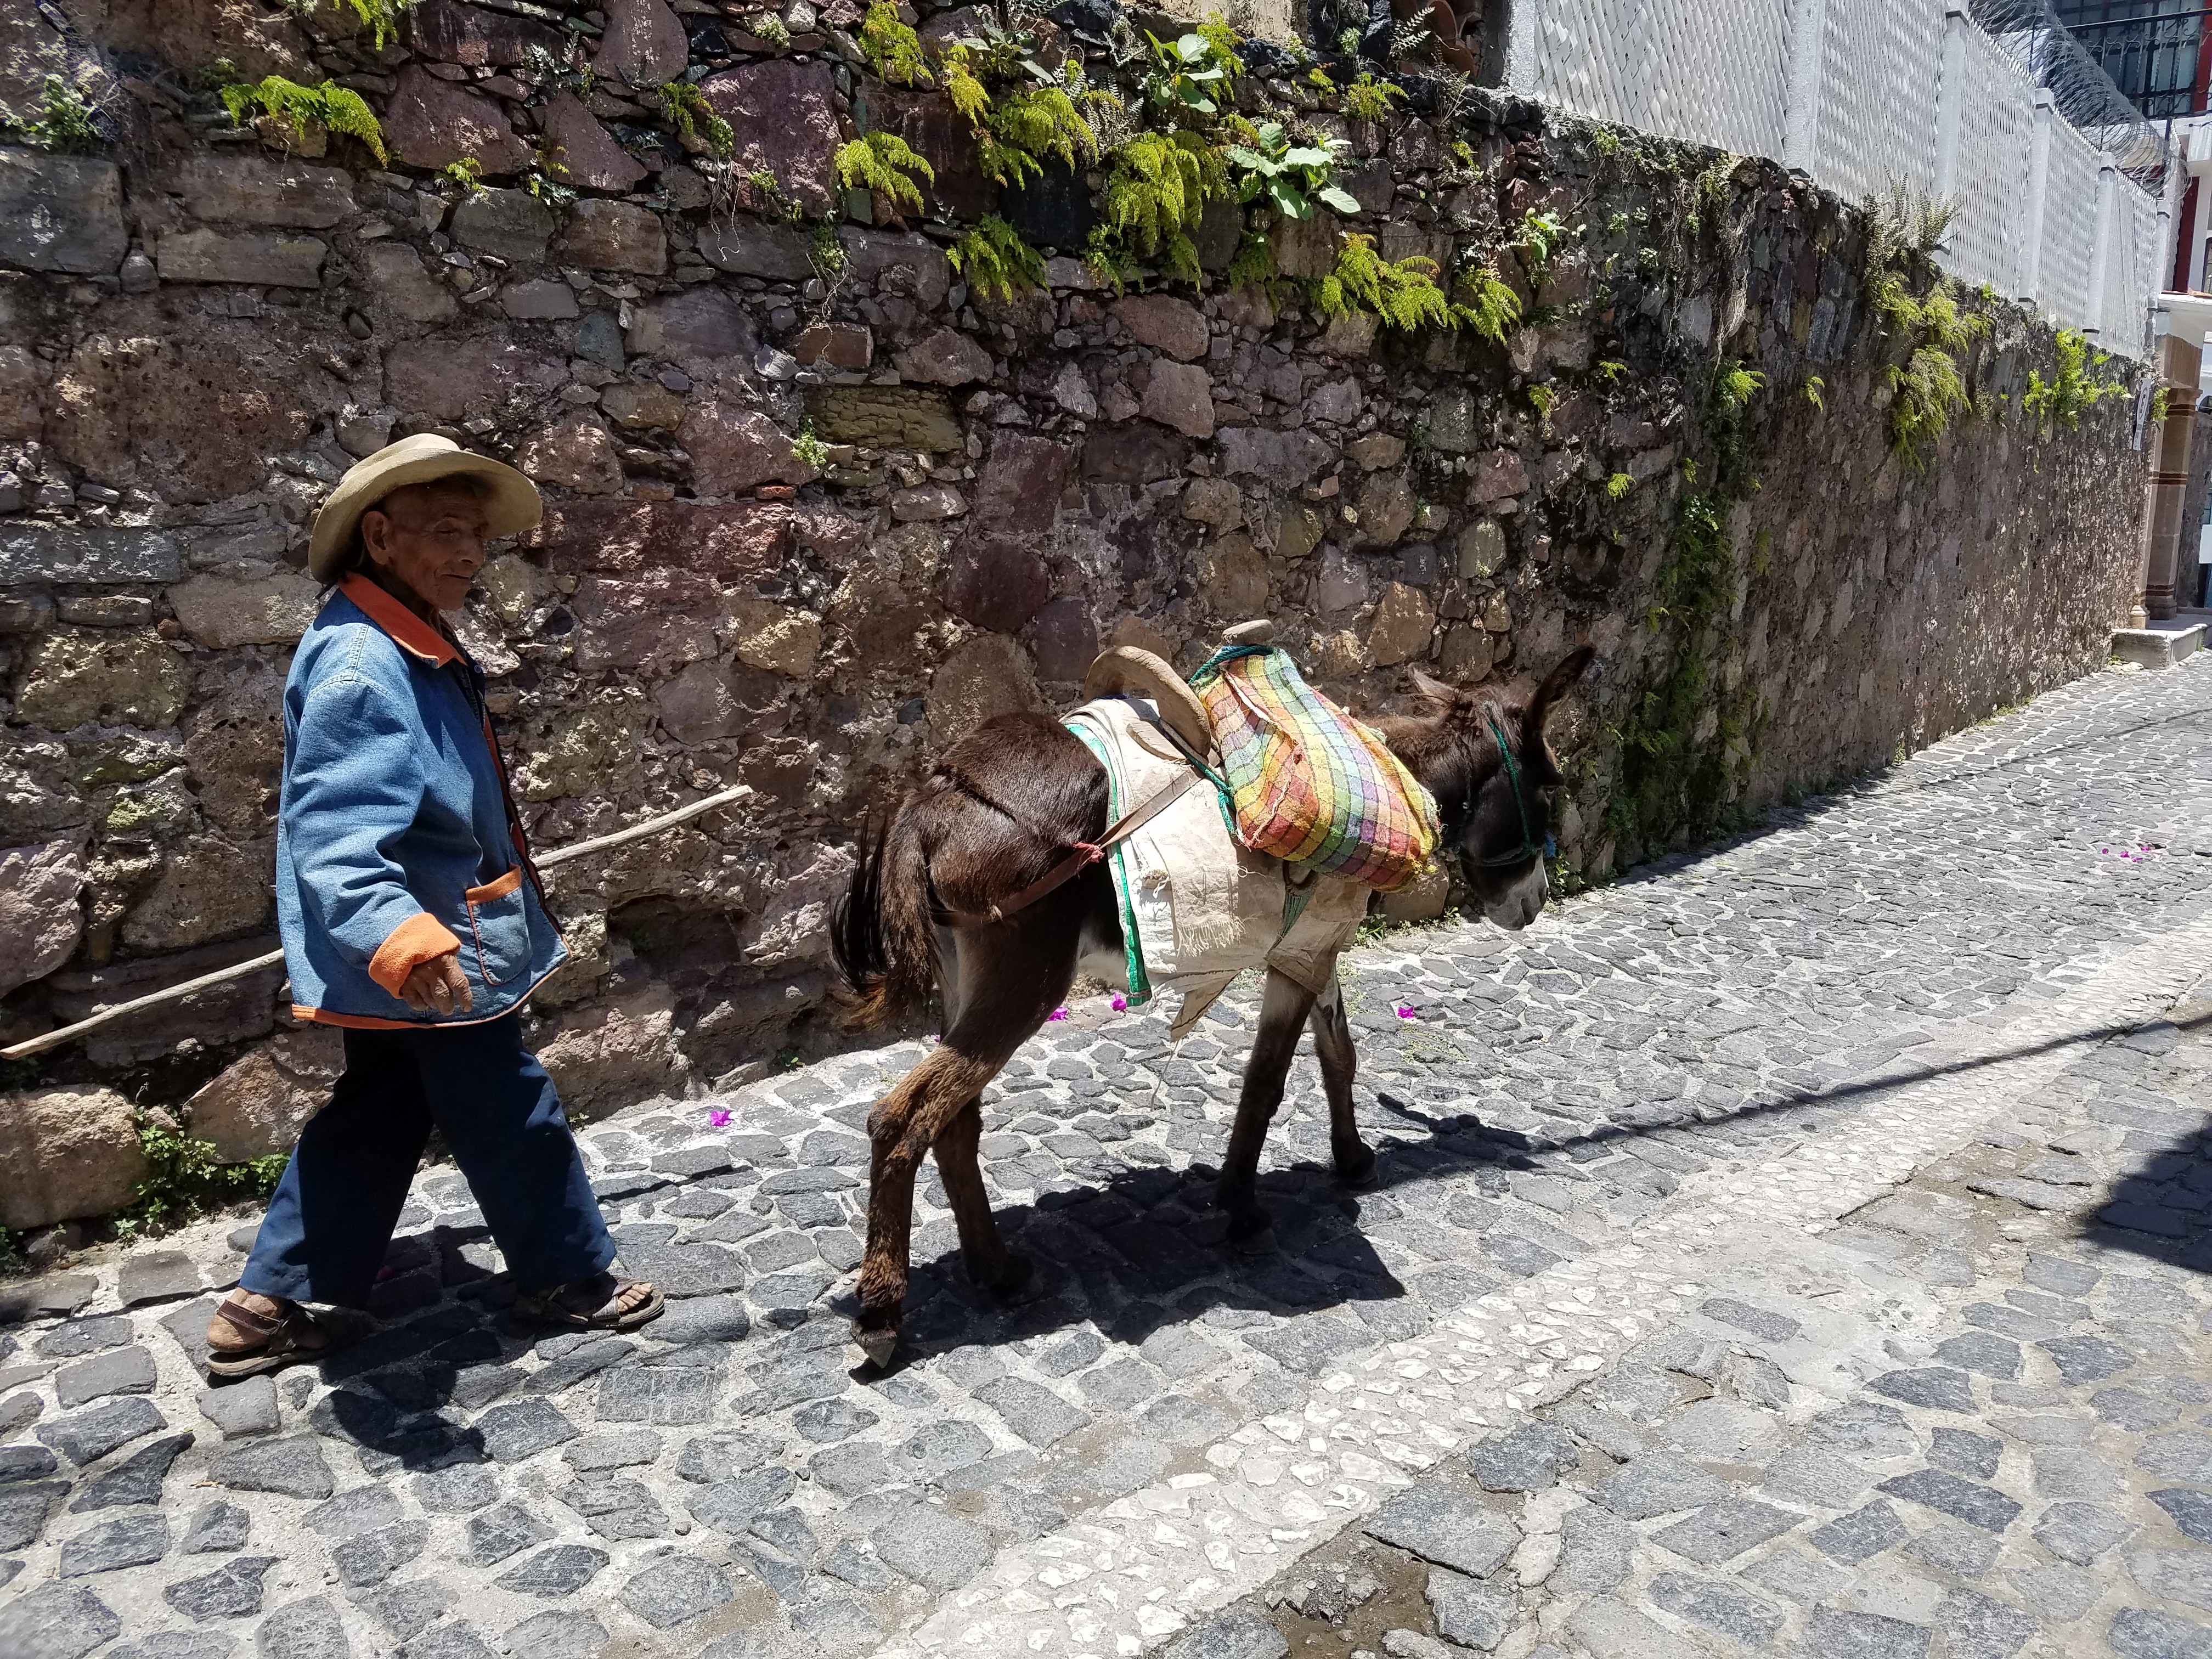 Donkeys are still used to transport, but on a smaller scale.